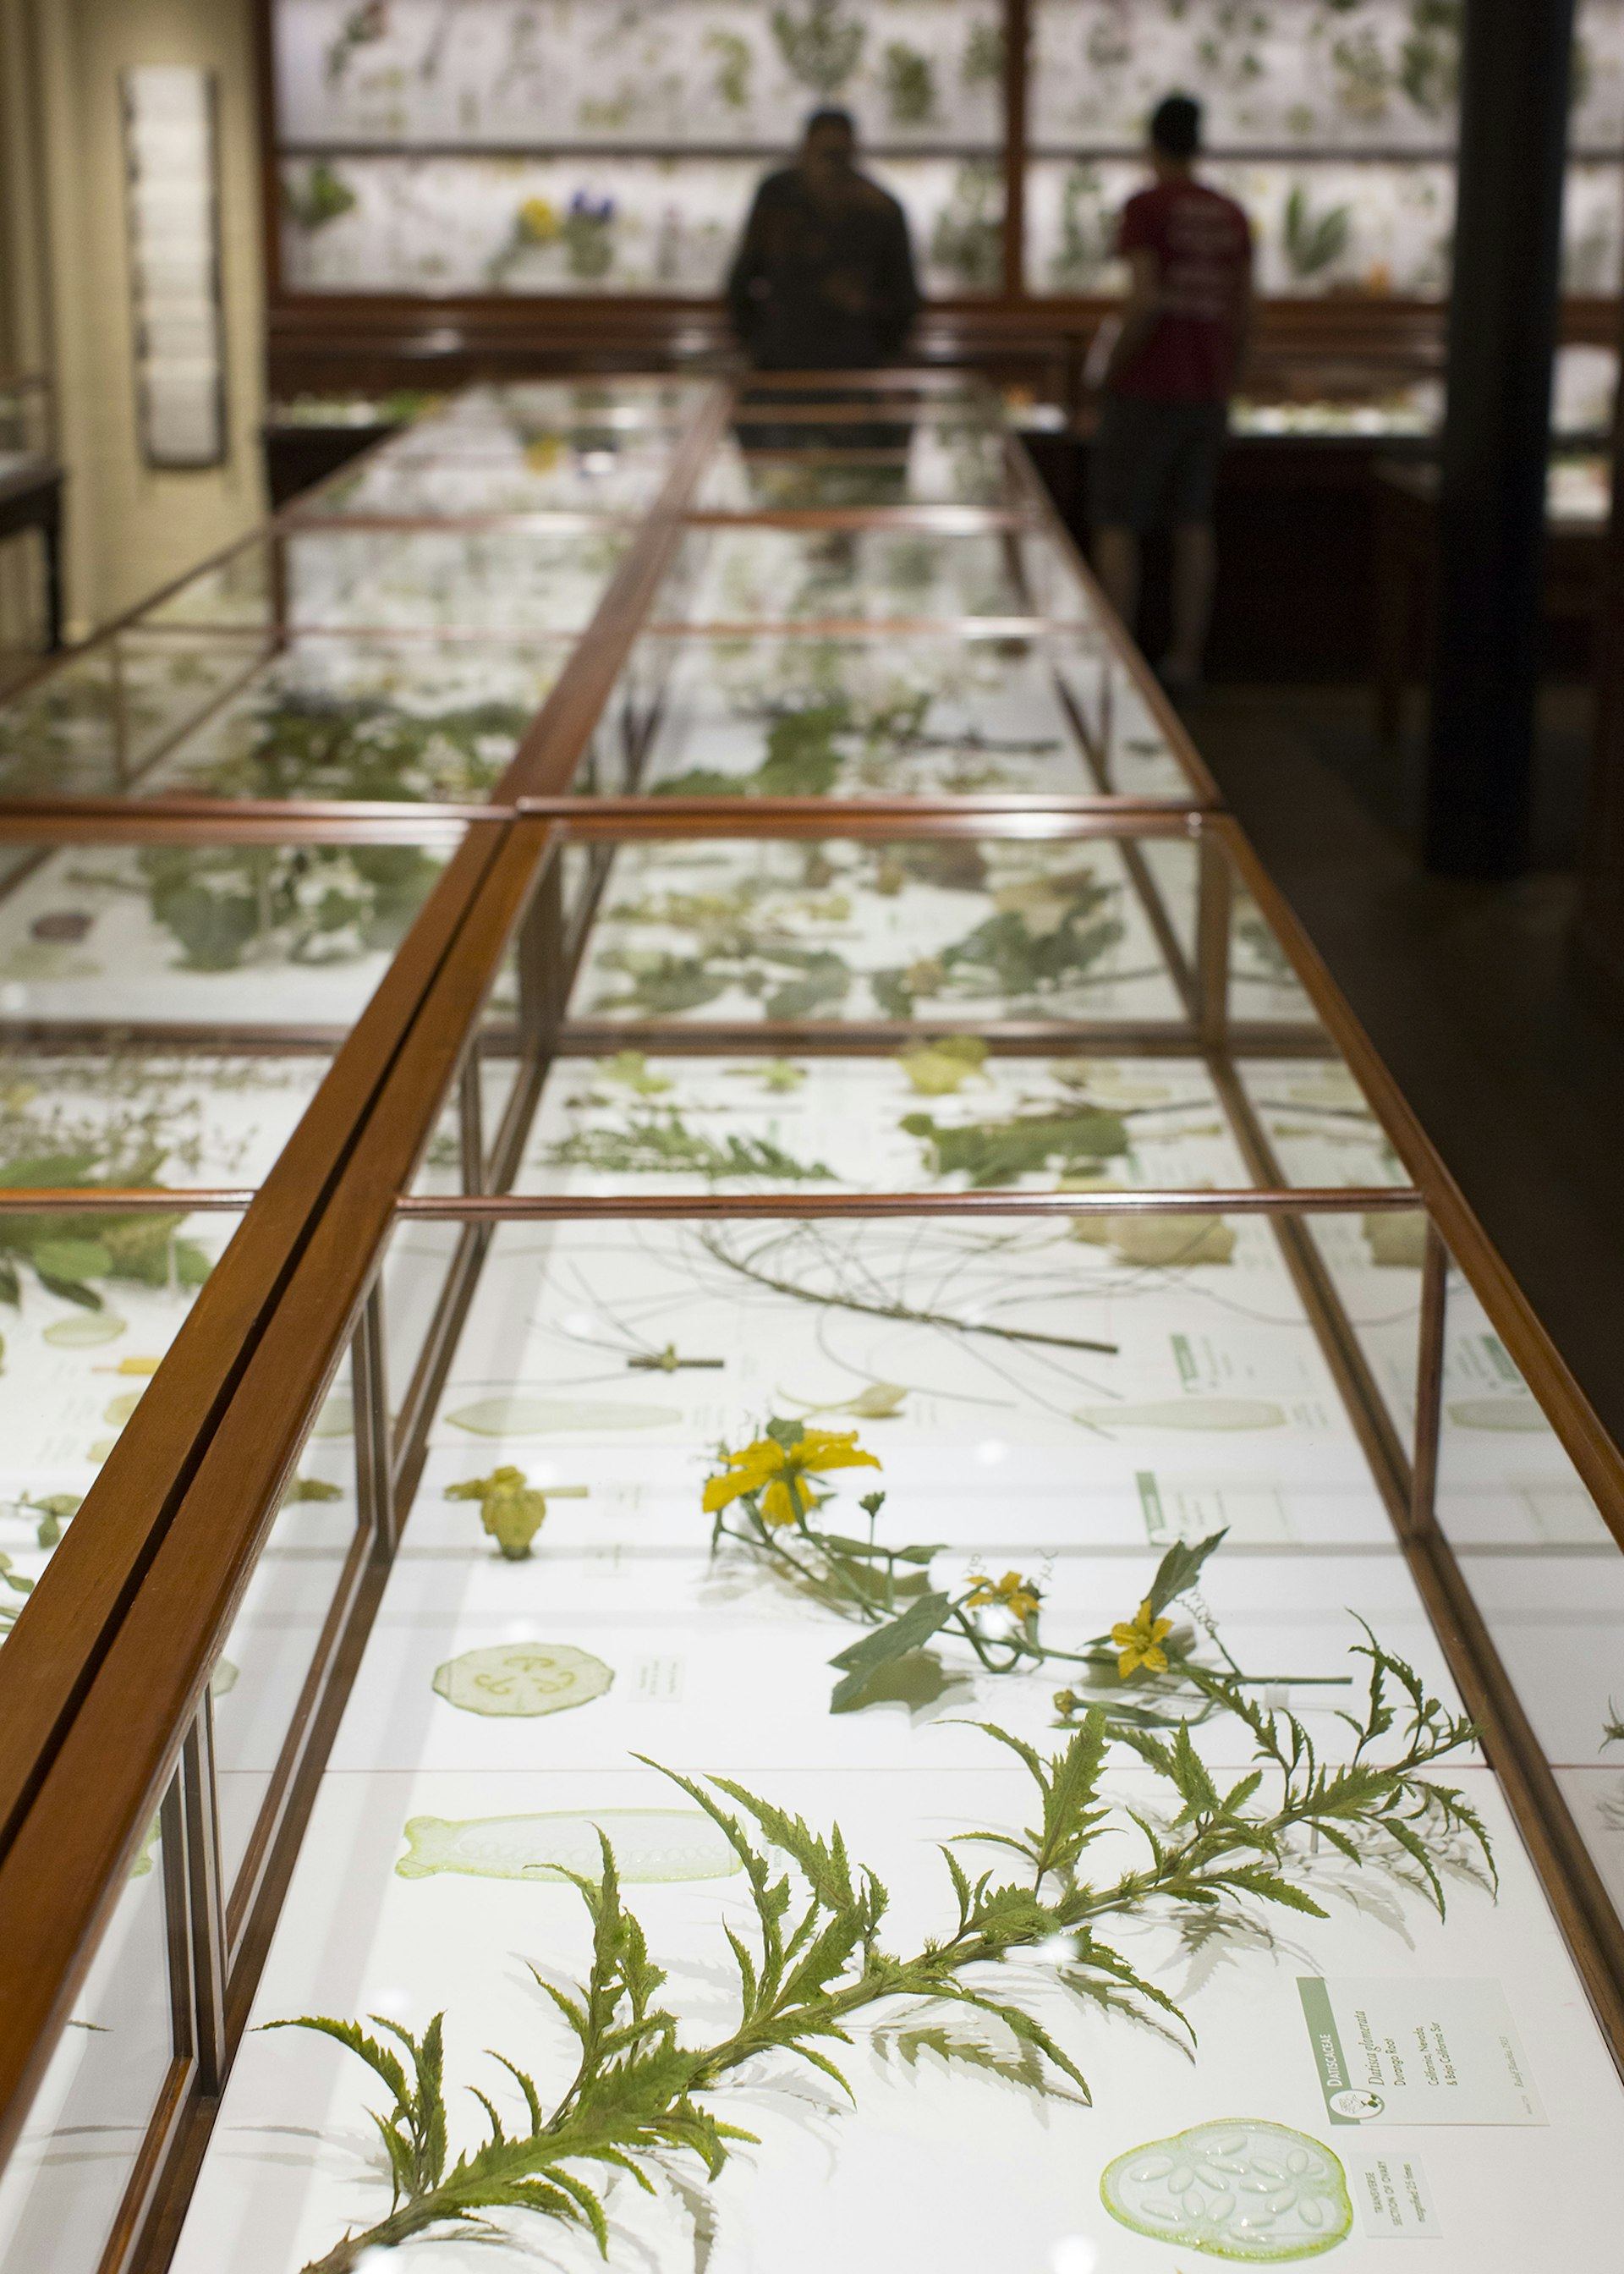 The Ware Collection for Blaschka Glass Models of Plants at the Harvard Museum of Natural History © Boston Globe / Getty Images